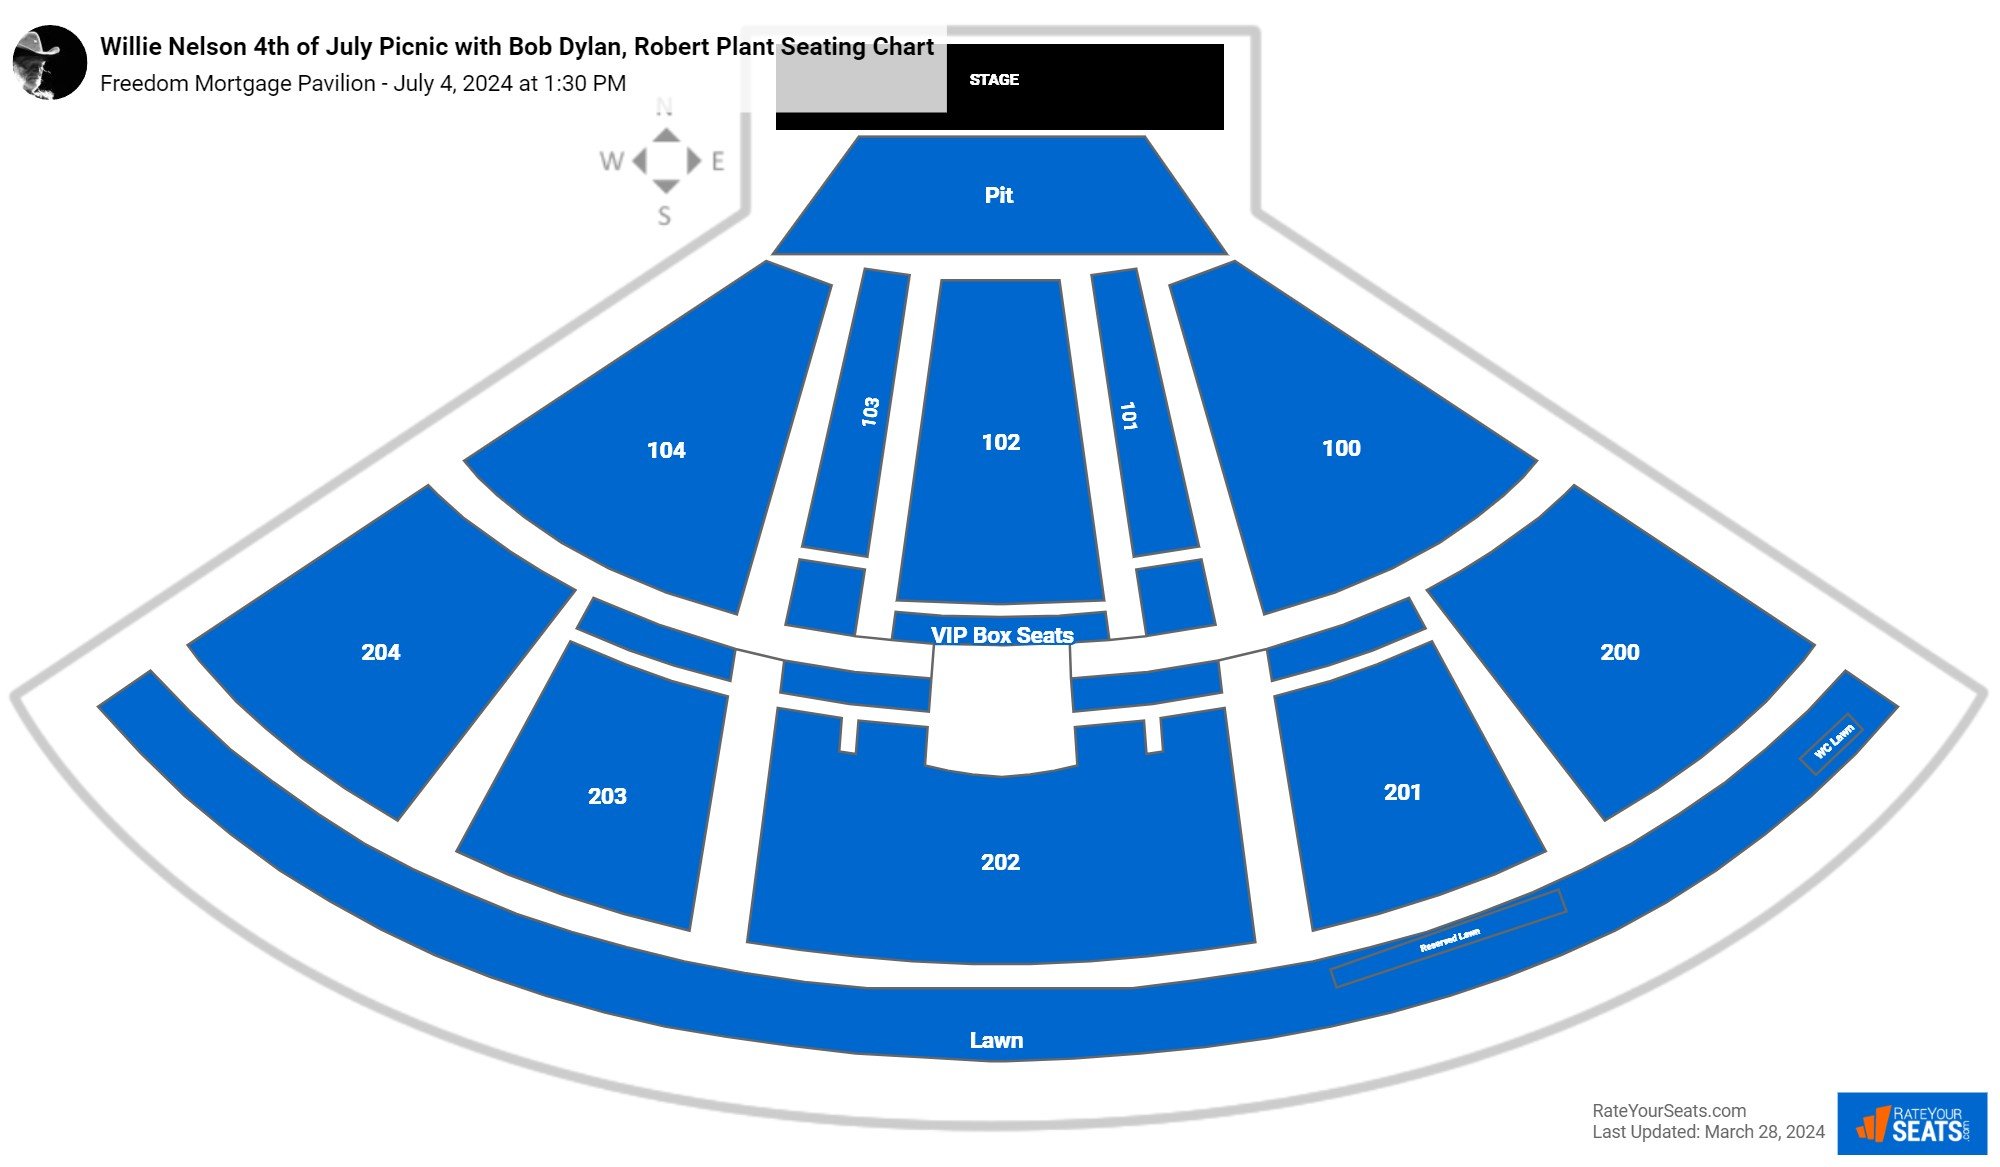 Willie Nelson 4th of July Picnic with Bob Dylan, Robert Plant seating chart Freedom Mortgage Pavilion